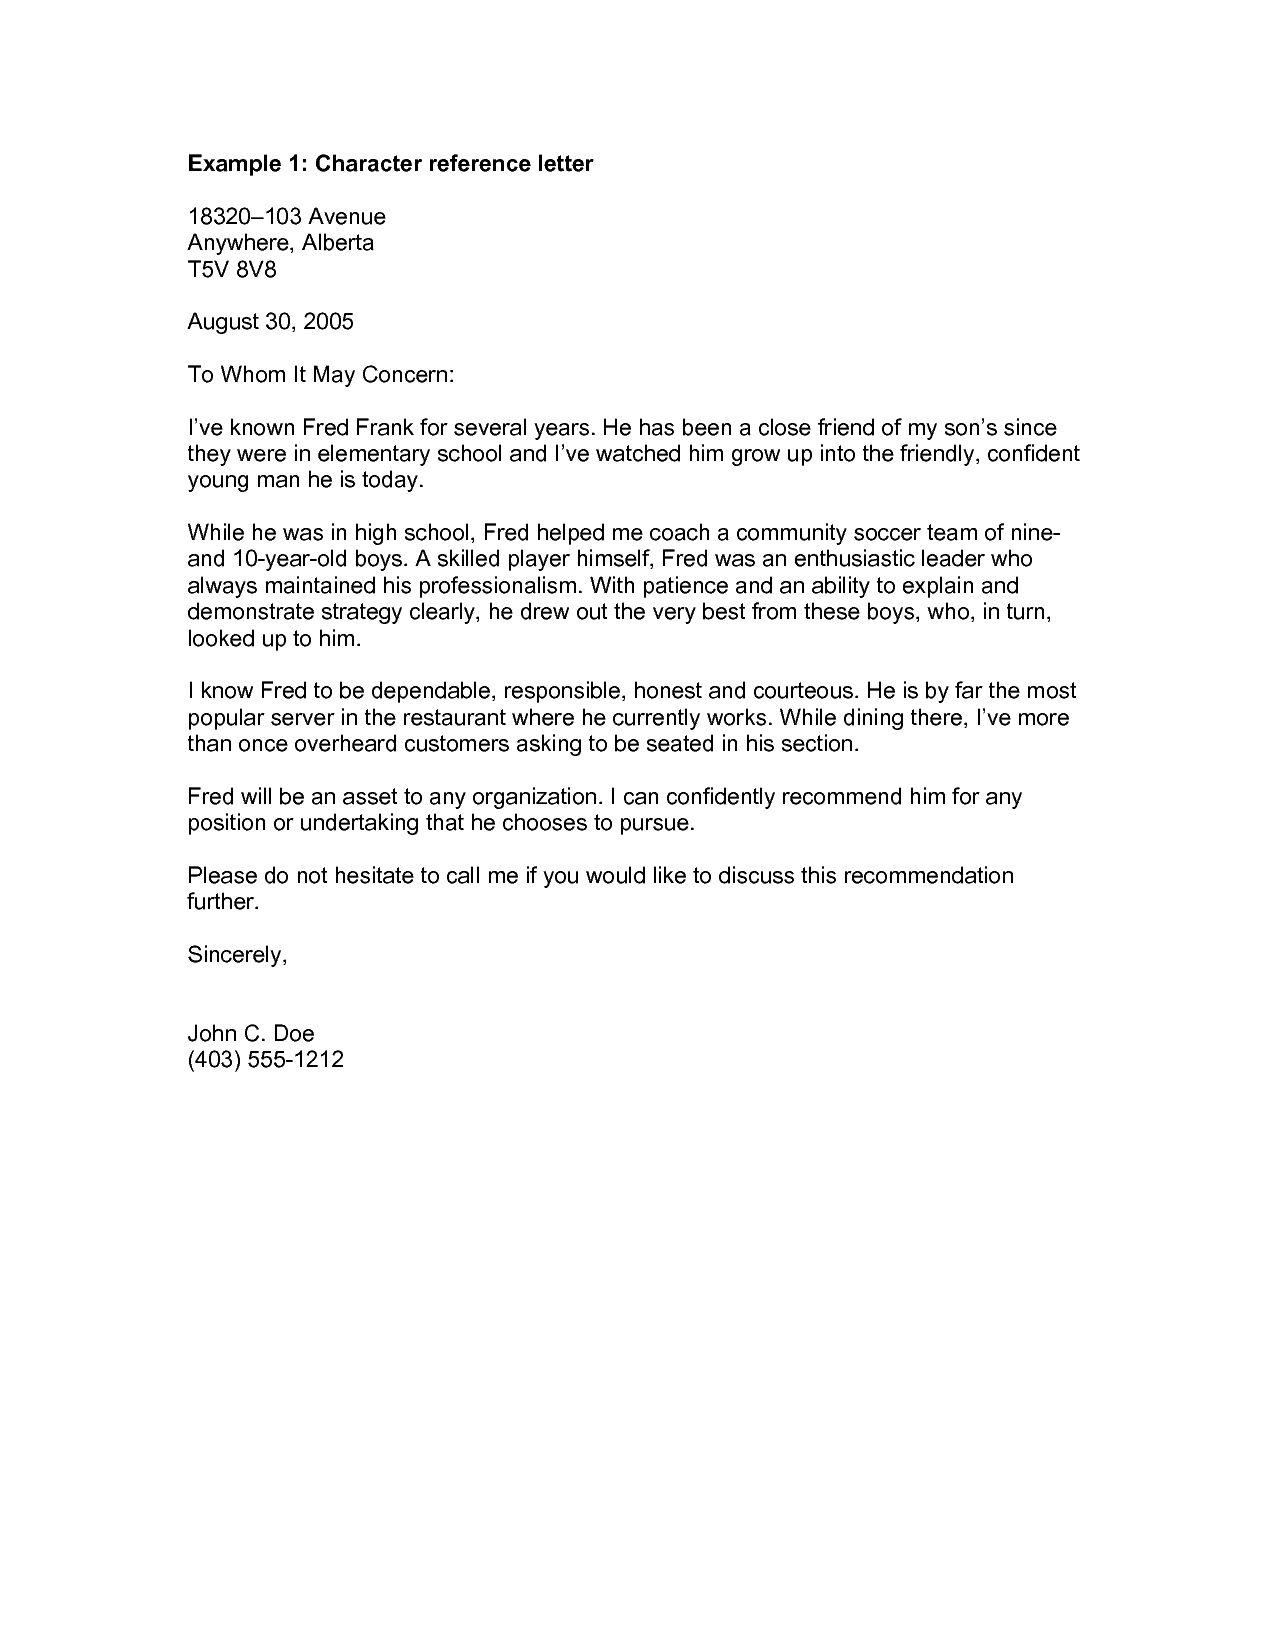 personal letter of recommendation for a friend template example-Re mendation Letter For A Friend Template OpengovpartnersorgLetter Re mendation Template Business Letter Sample 4-m